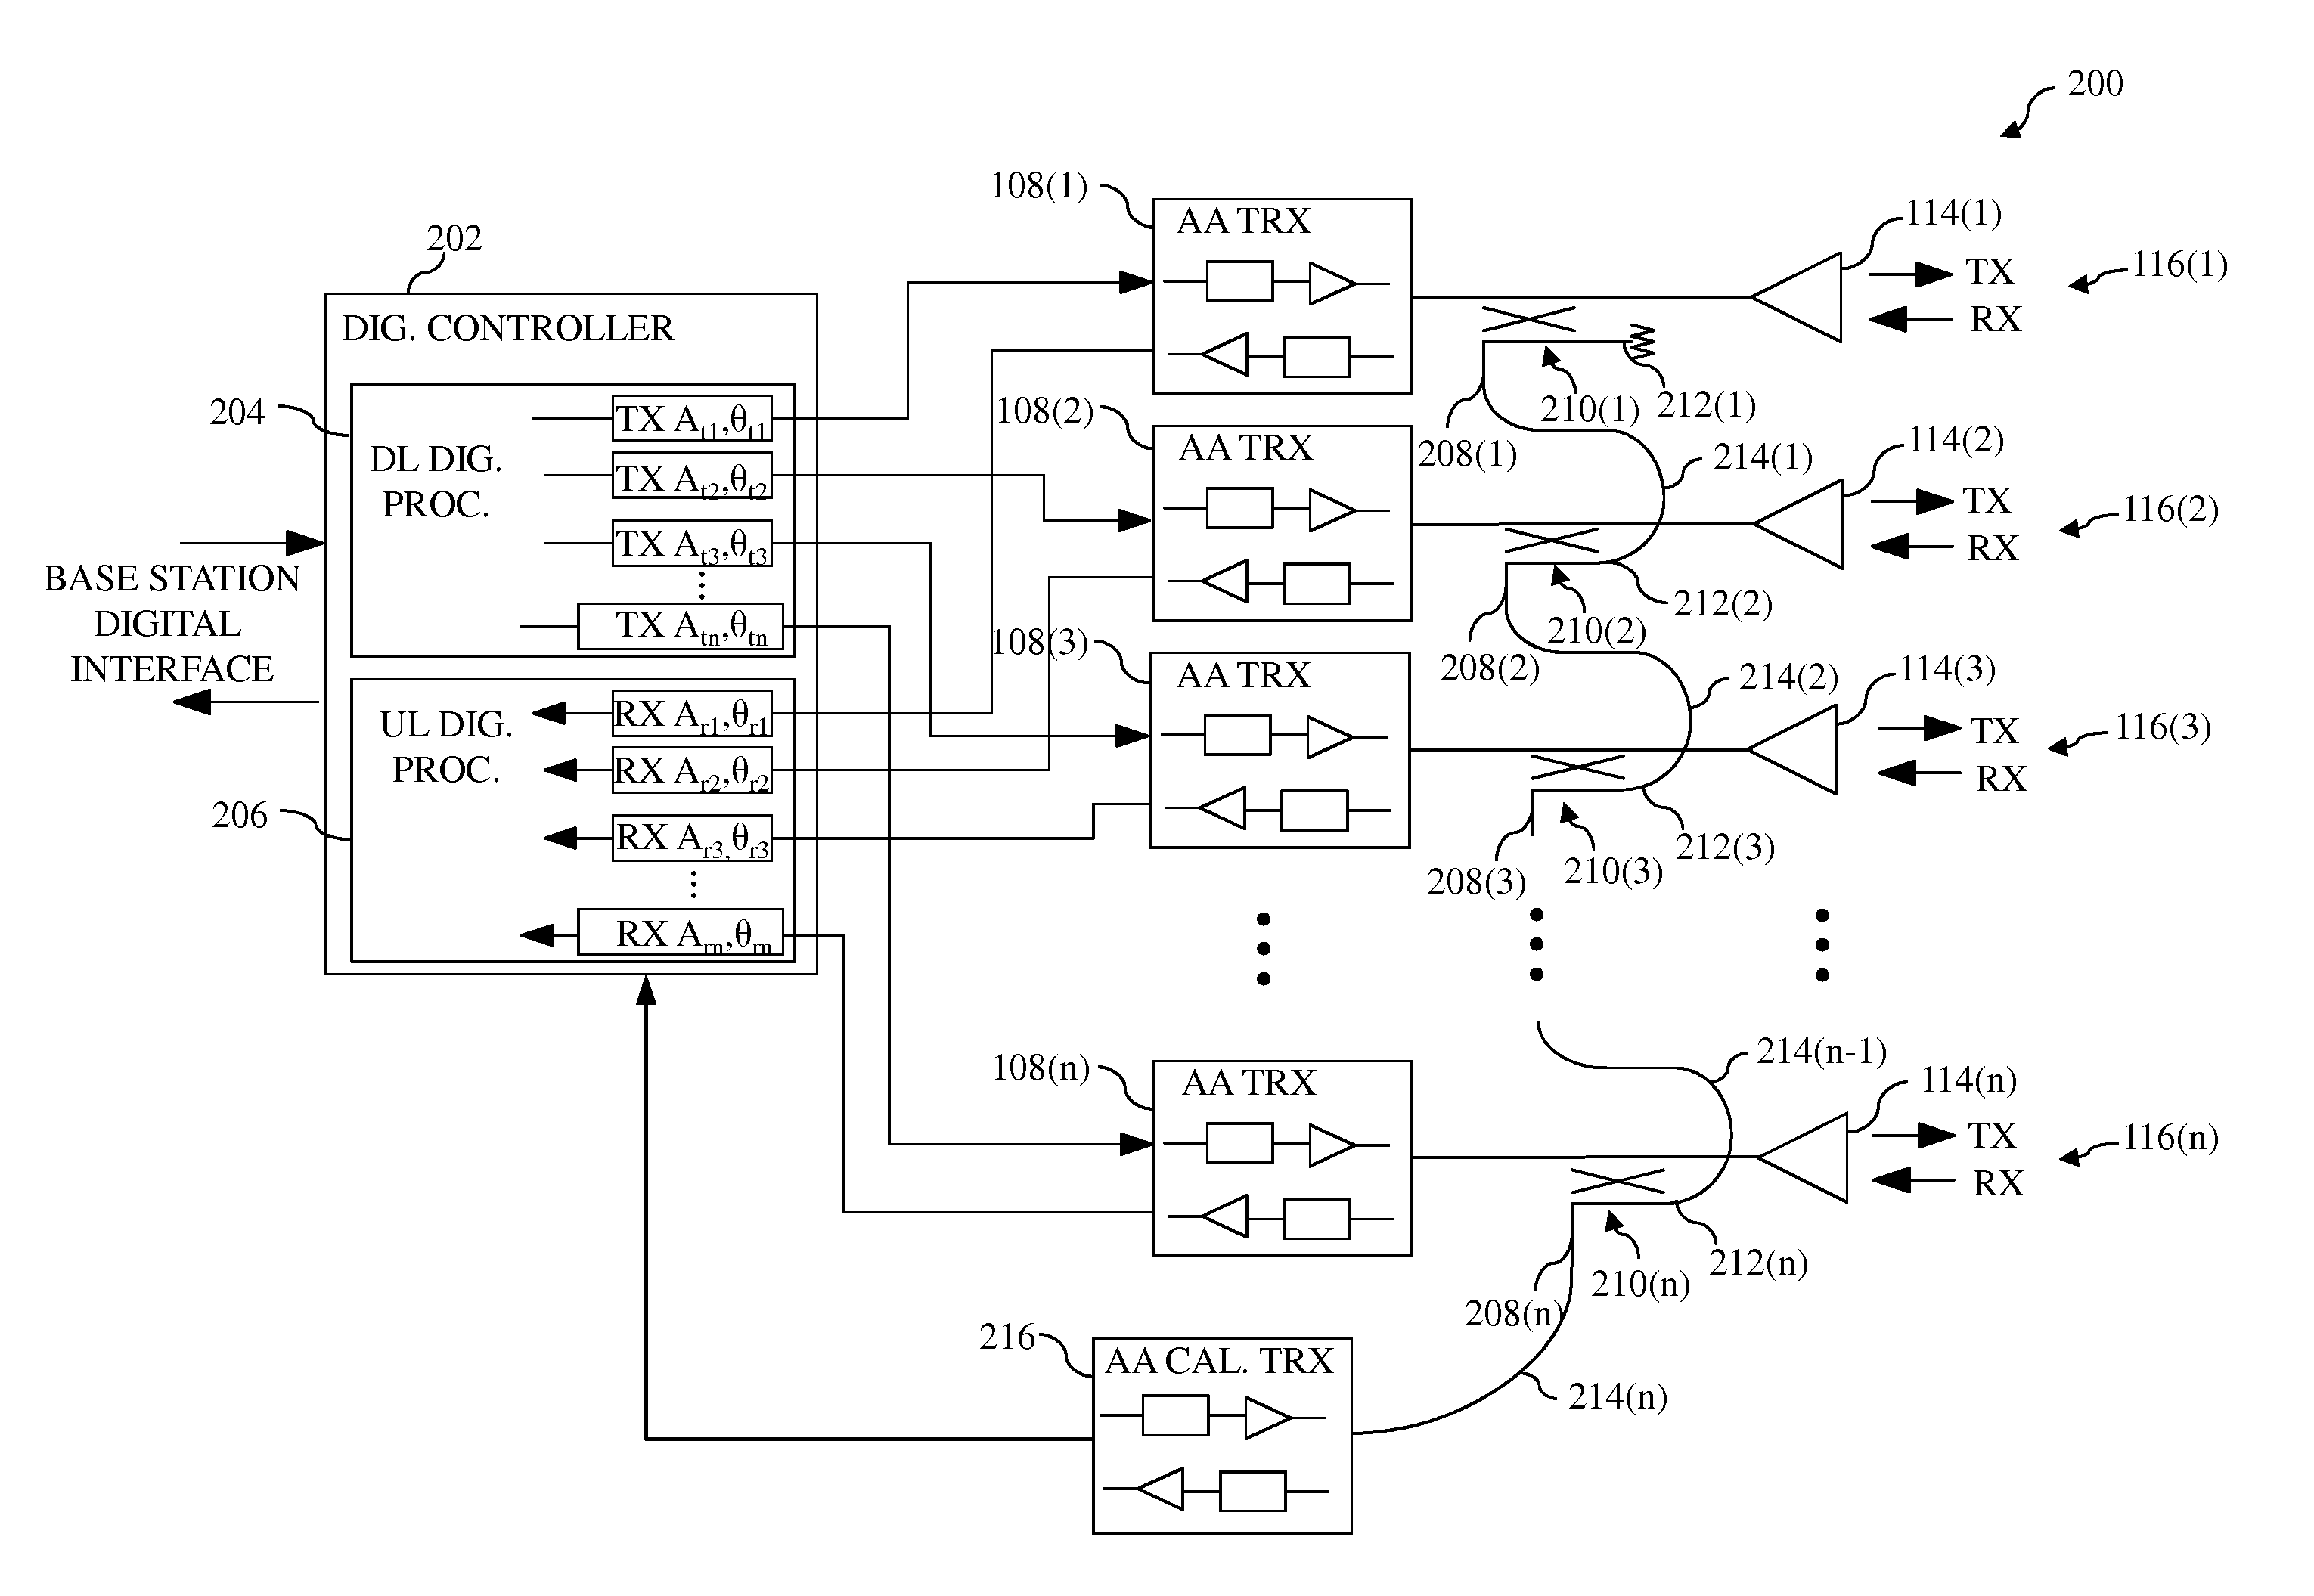 Series-connected couplers for active antenna systems